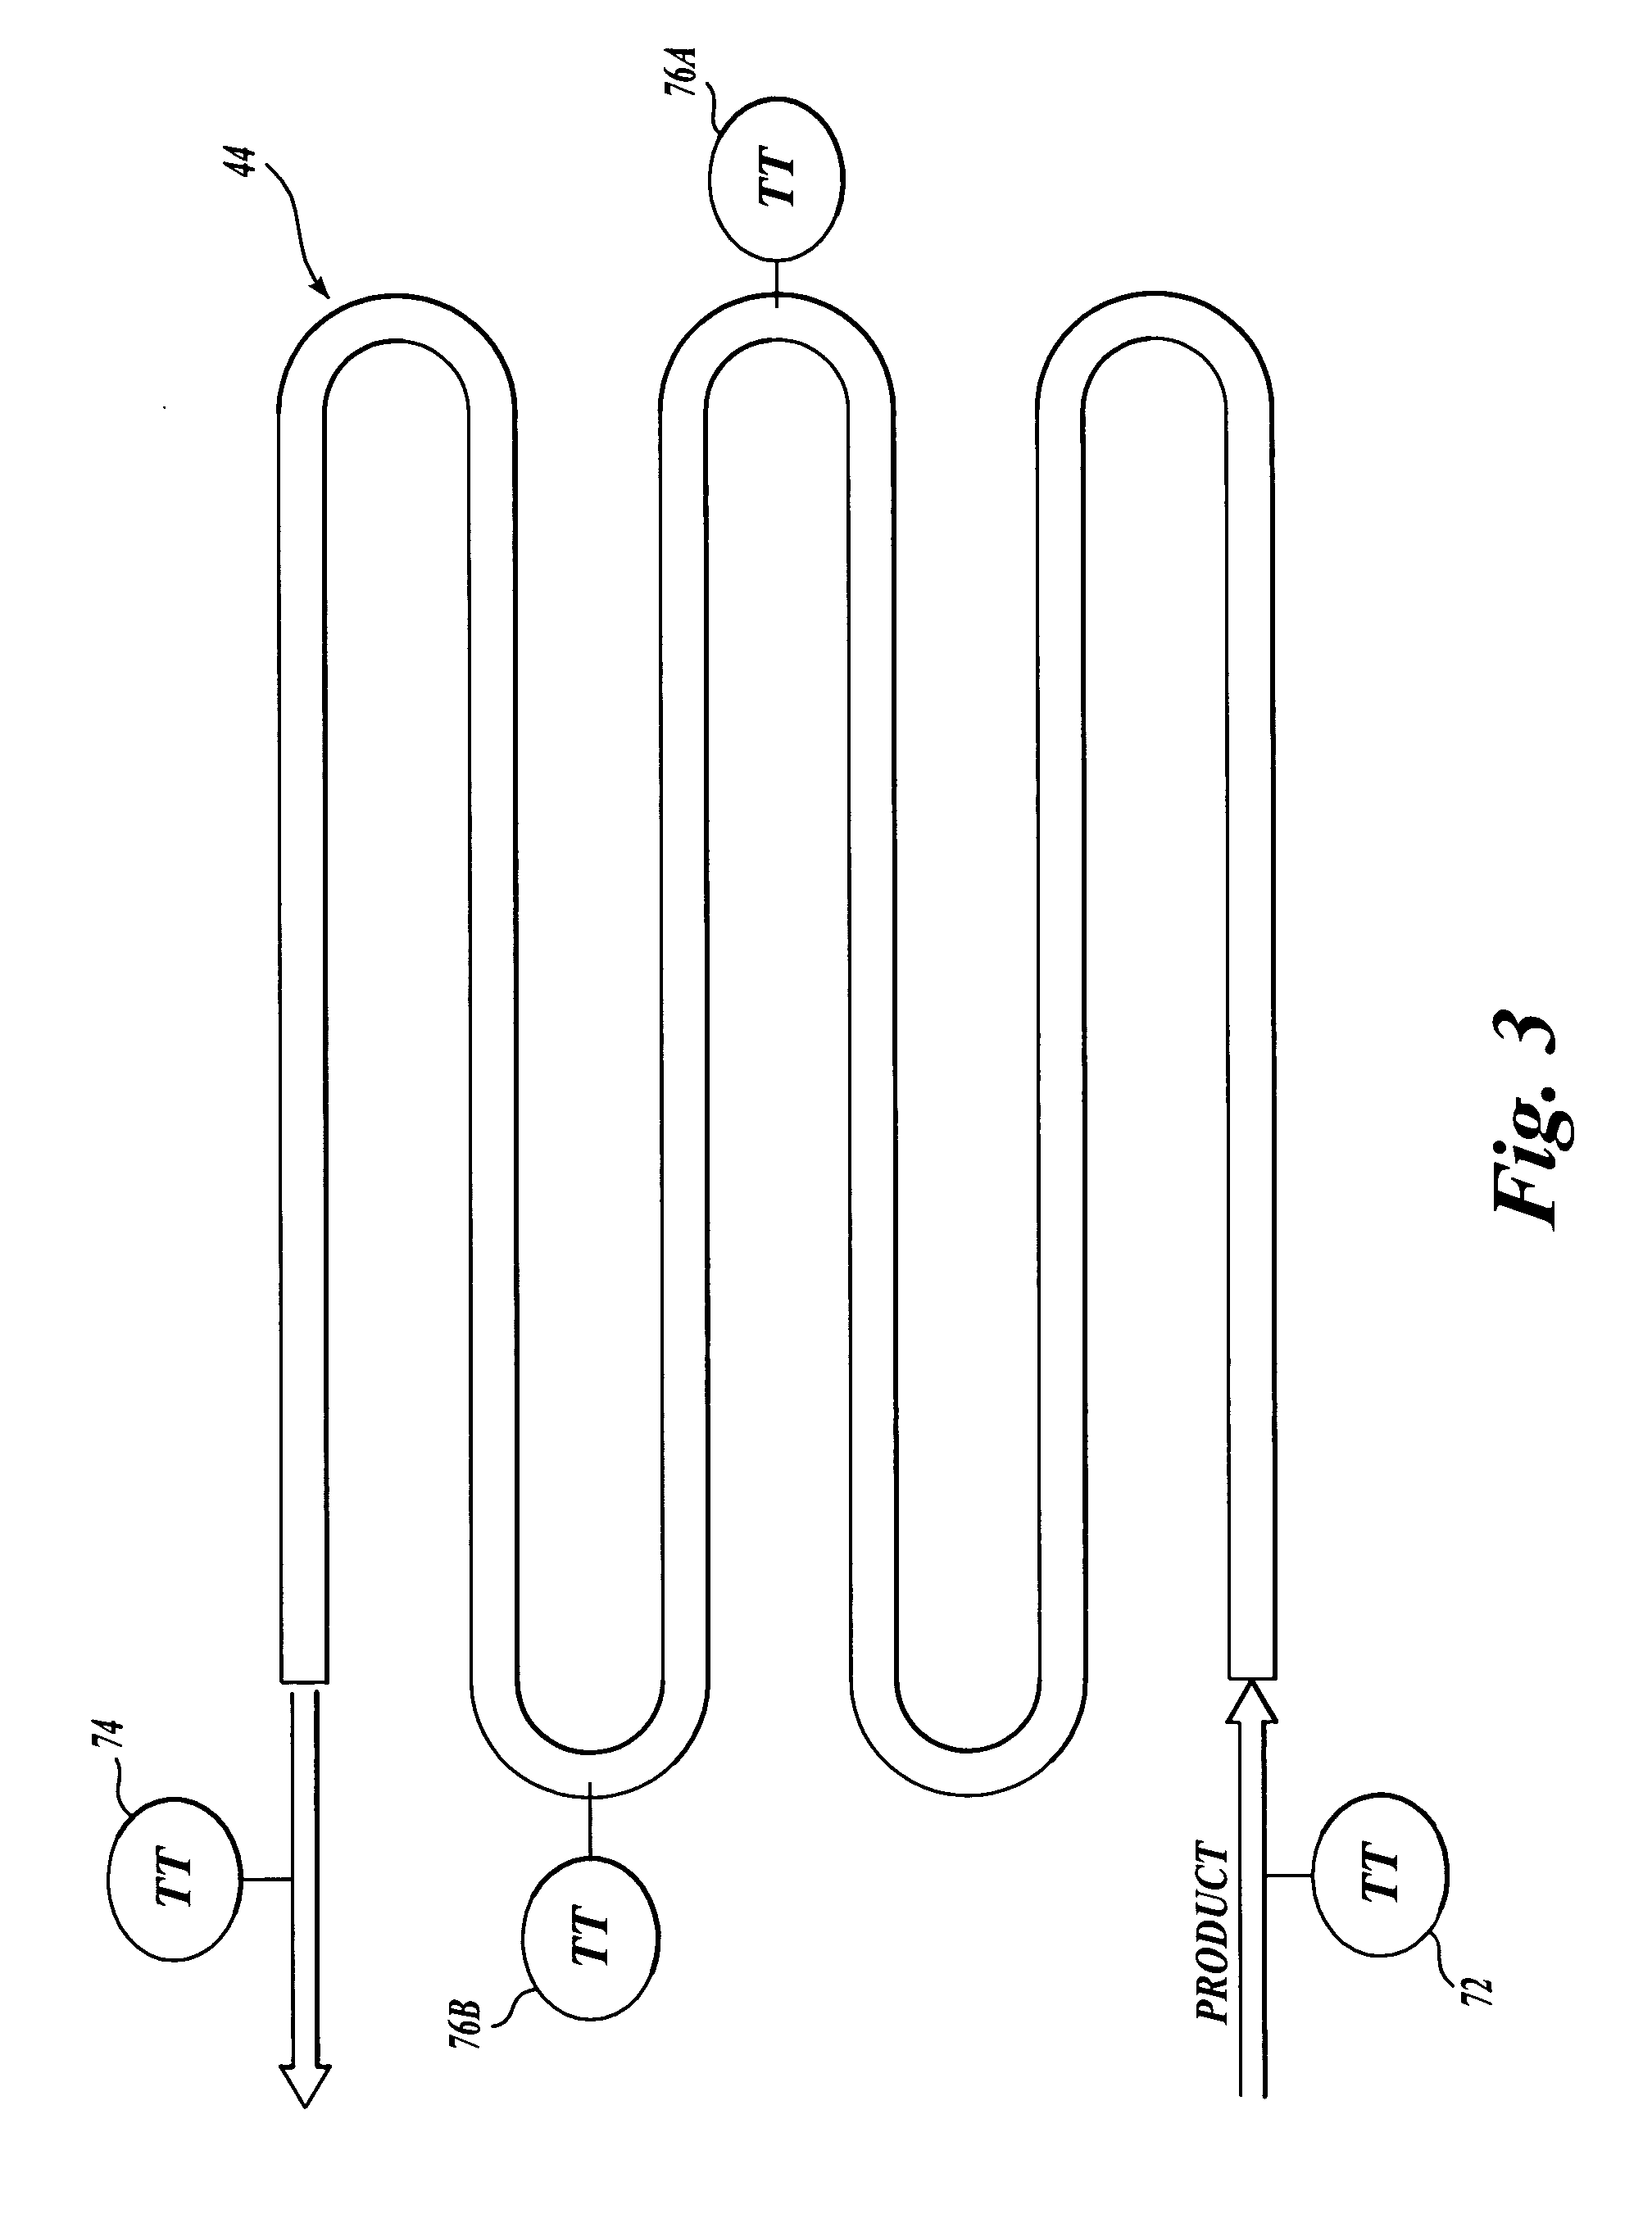 Aseptic processing system and method